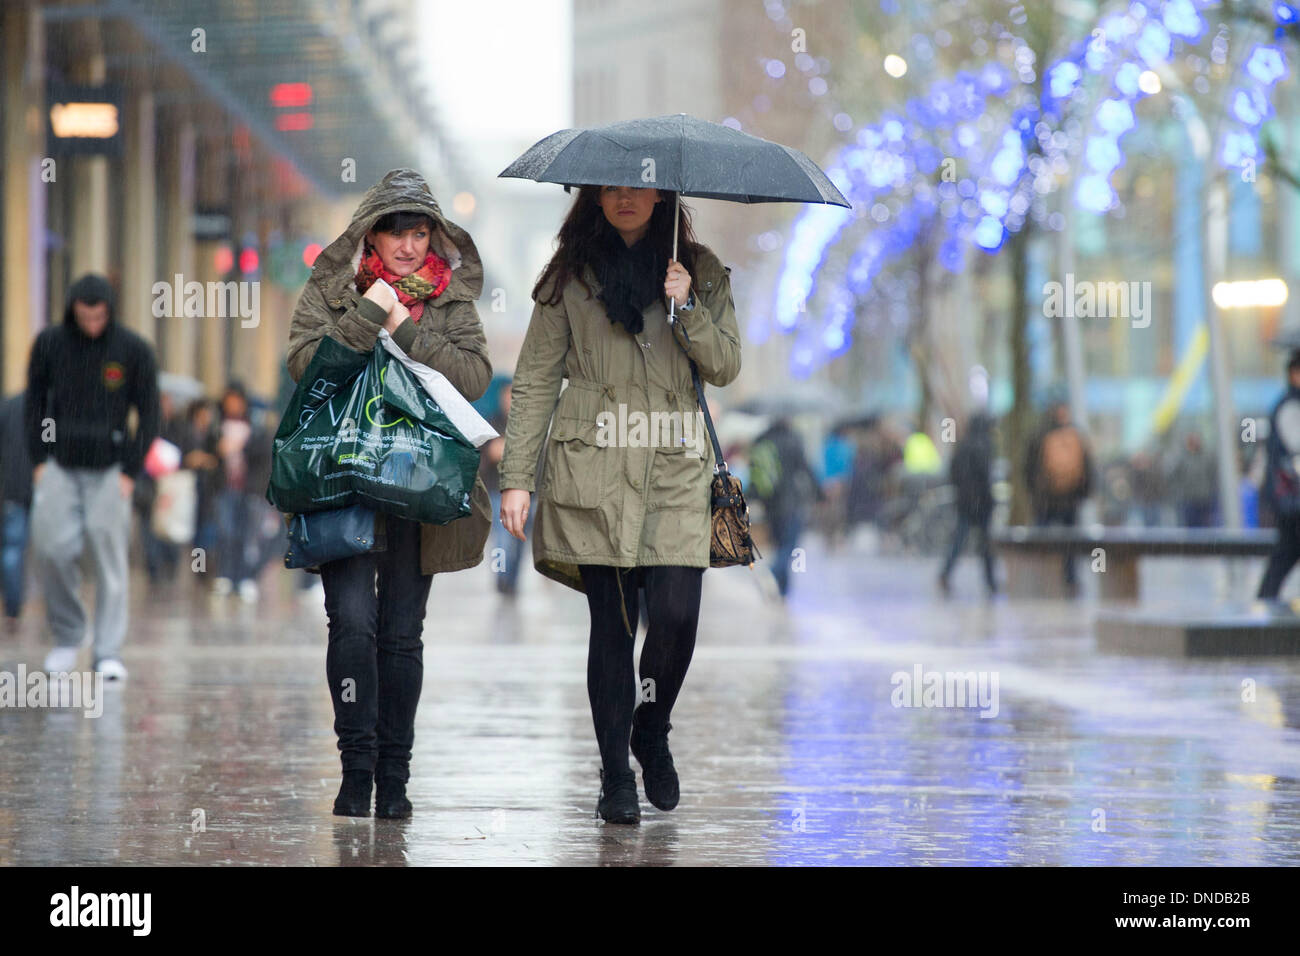 Cardiff, Wales, UK. December 23. Christmas shoppers brave bad weather on Mega Monday to go shopping for last minute presents on December 23 Cardiff, Wales. Shoppers are expected to spend £12 billion in four days. Some shops have already started their sales. (Photo by Matthew Horwood/Alamy Live News) Stock Photo